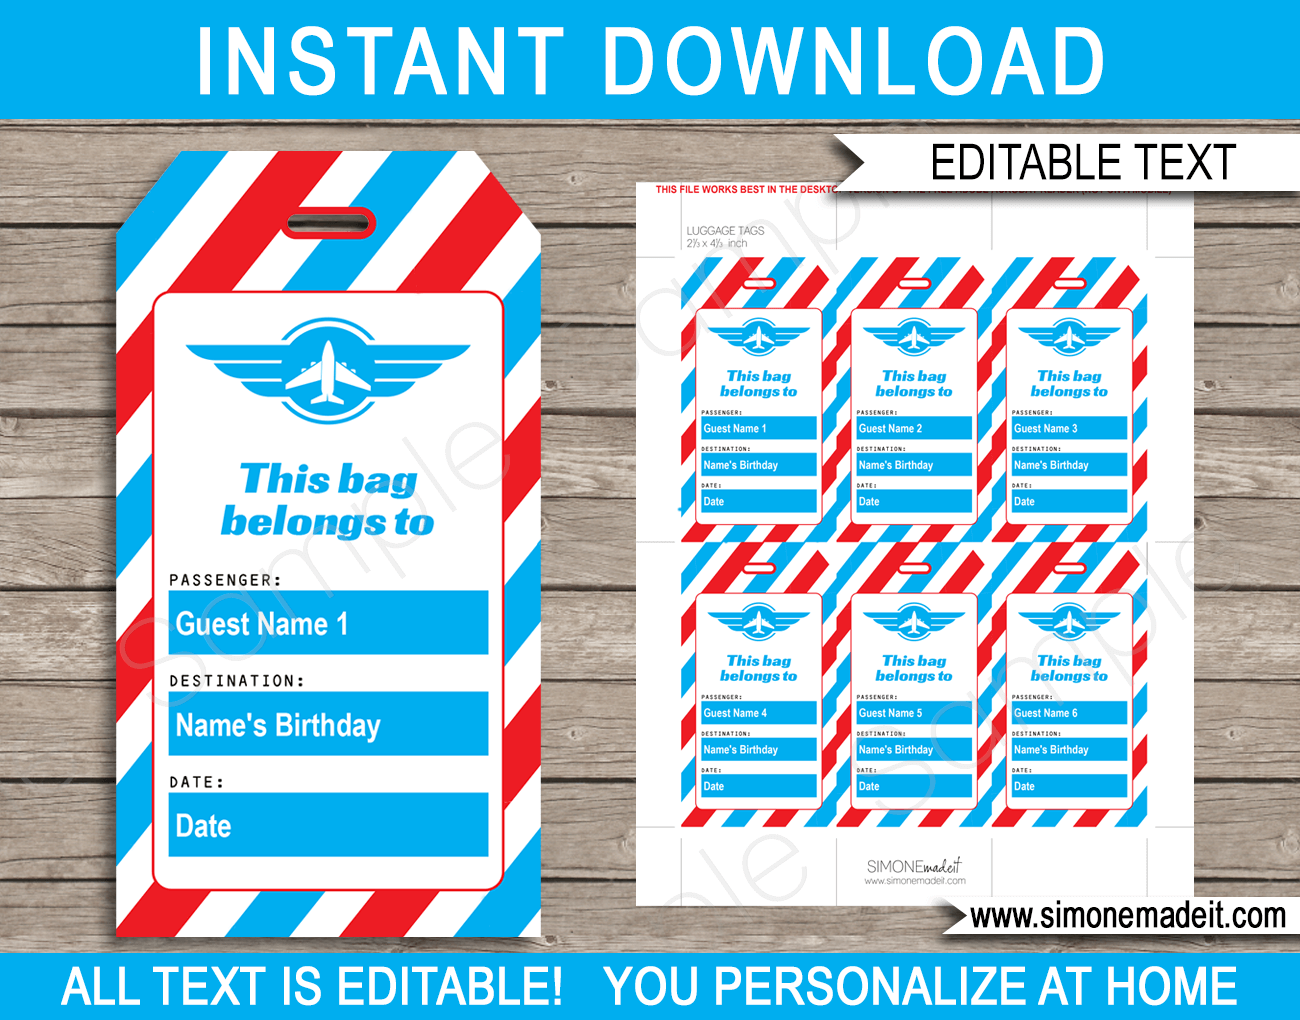 Printable Airplane Party Luggage Tags Template | Favor Tags | Thank You Tags | Birthday Party | Editable DIY Template | $3.00 INSTANT DOWNLOAD via SIMONEmadeit.com